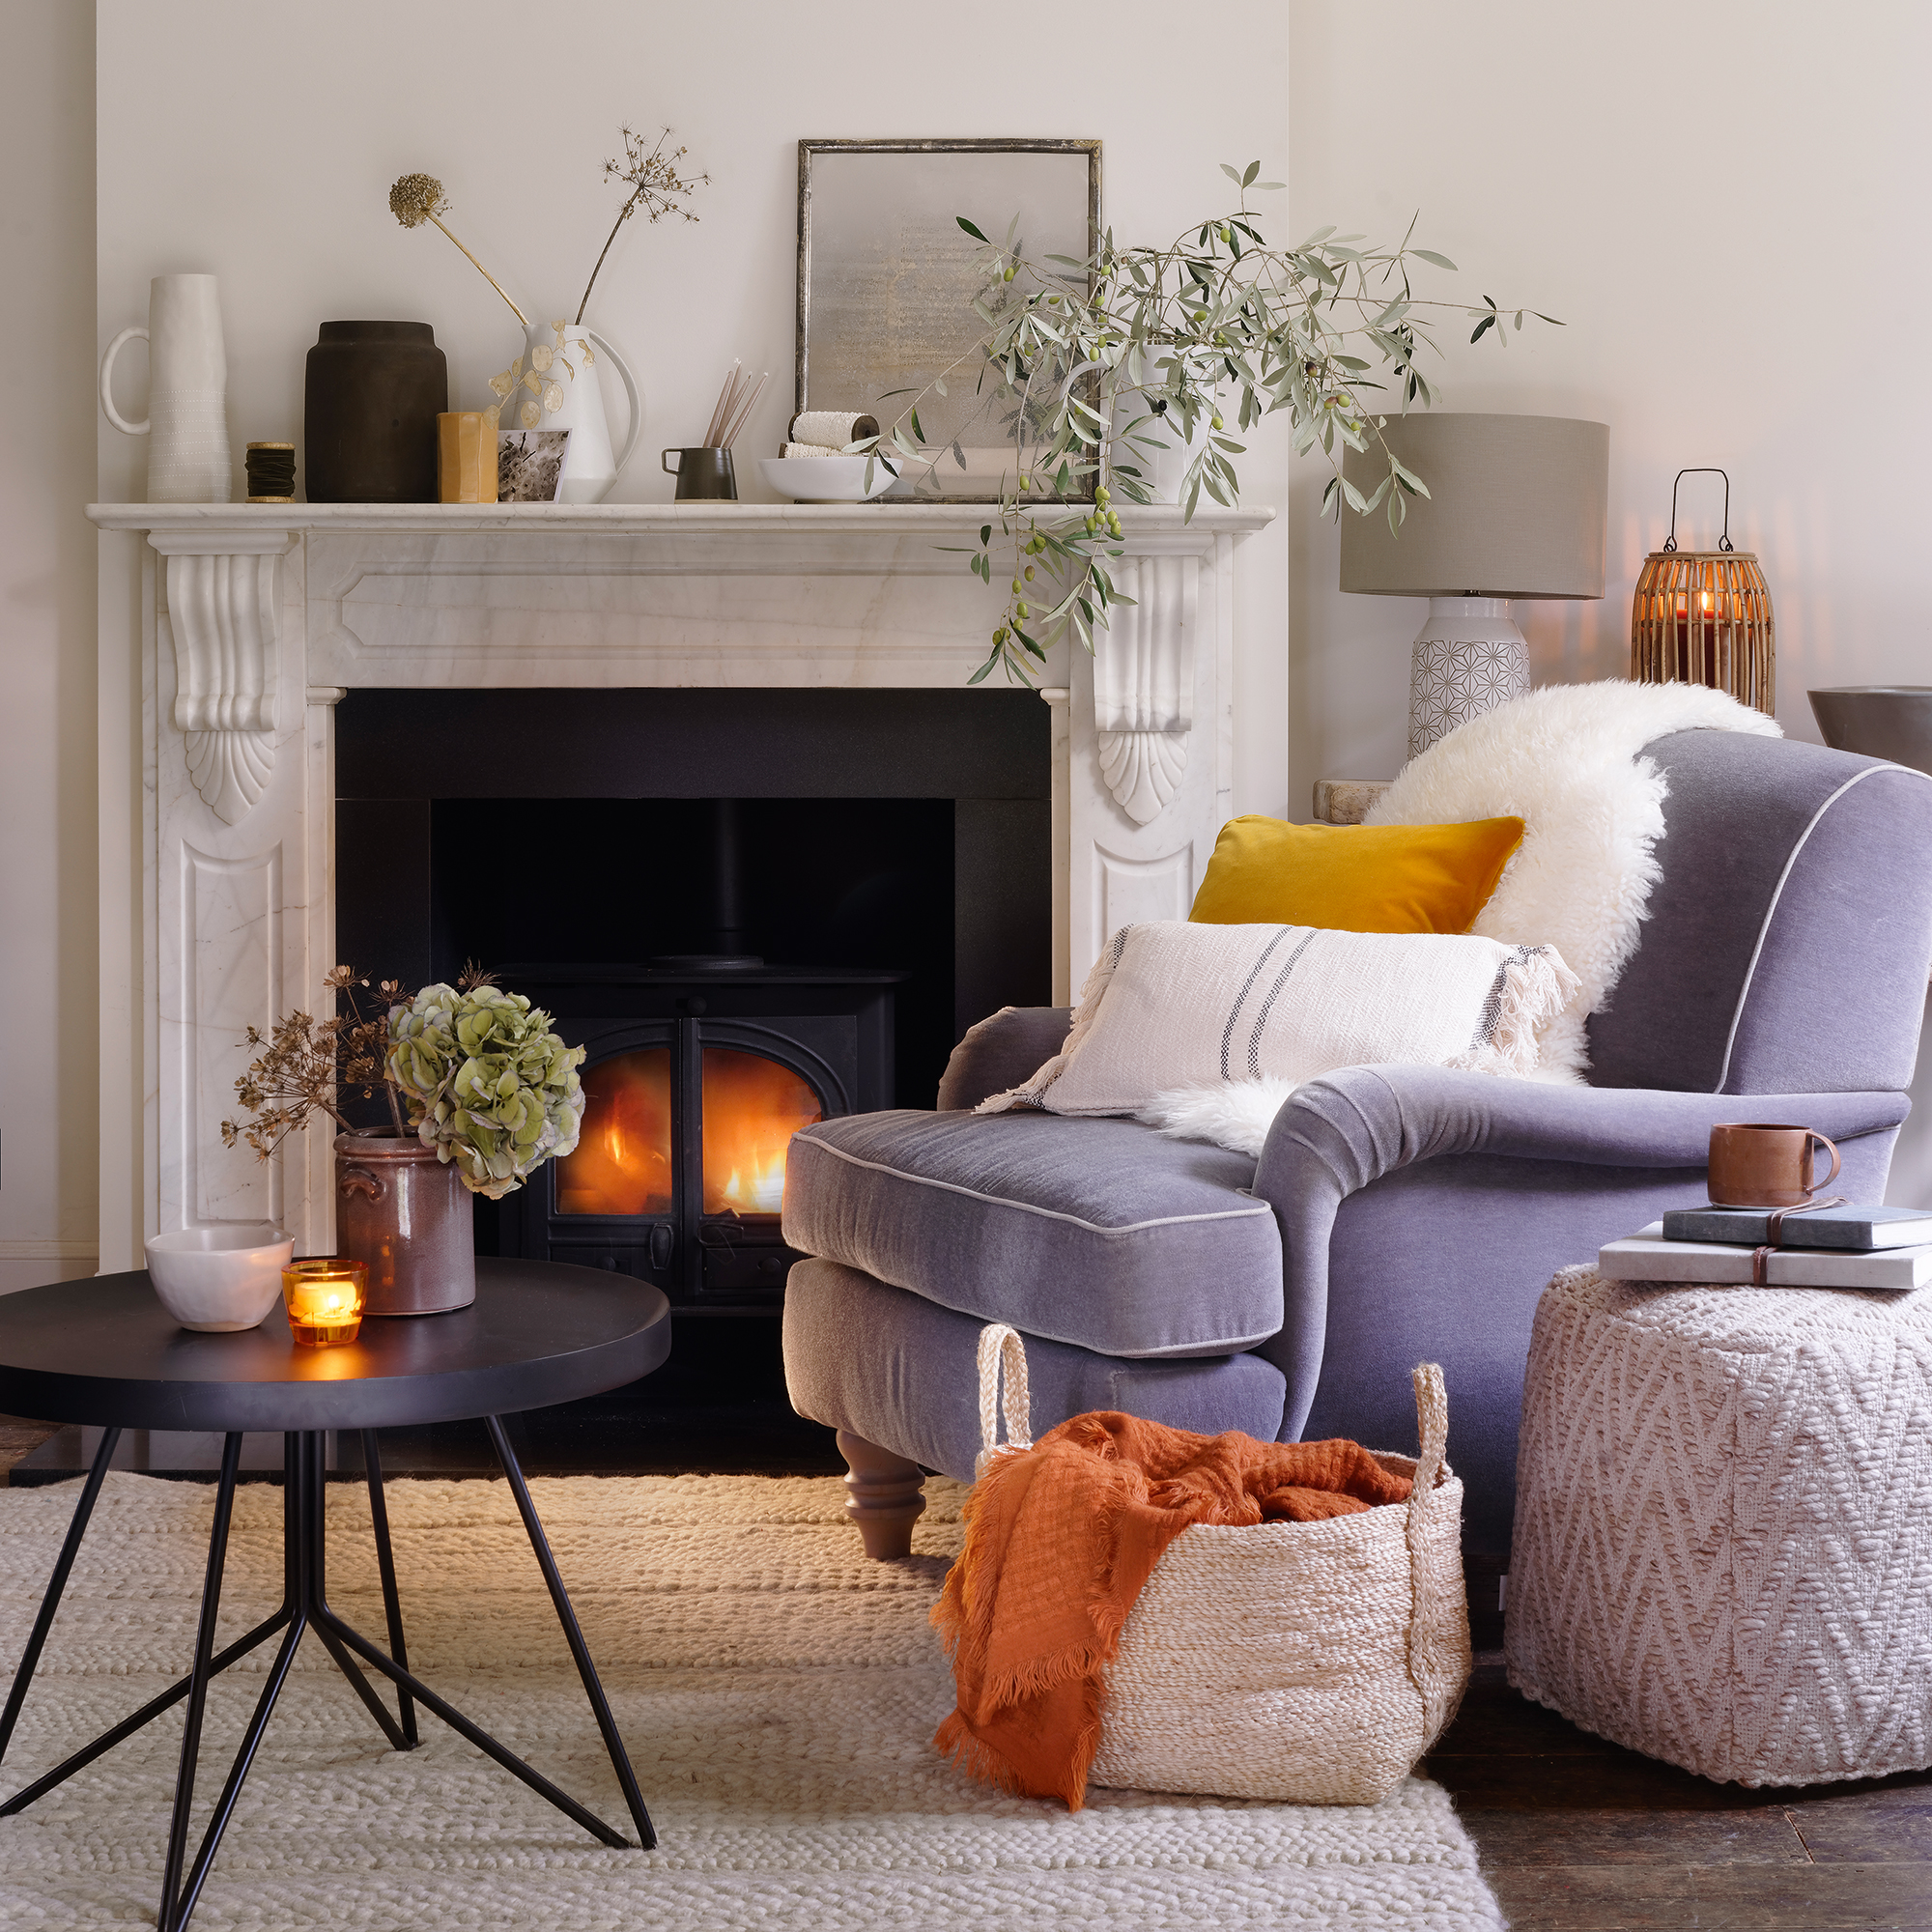 10 Expert Design Ideas to Make Your Home Warm and Cozy